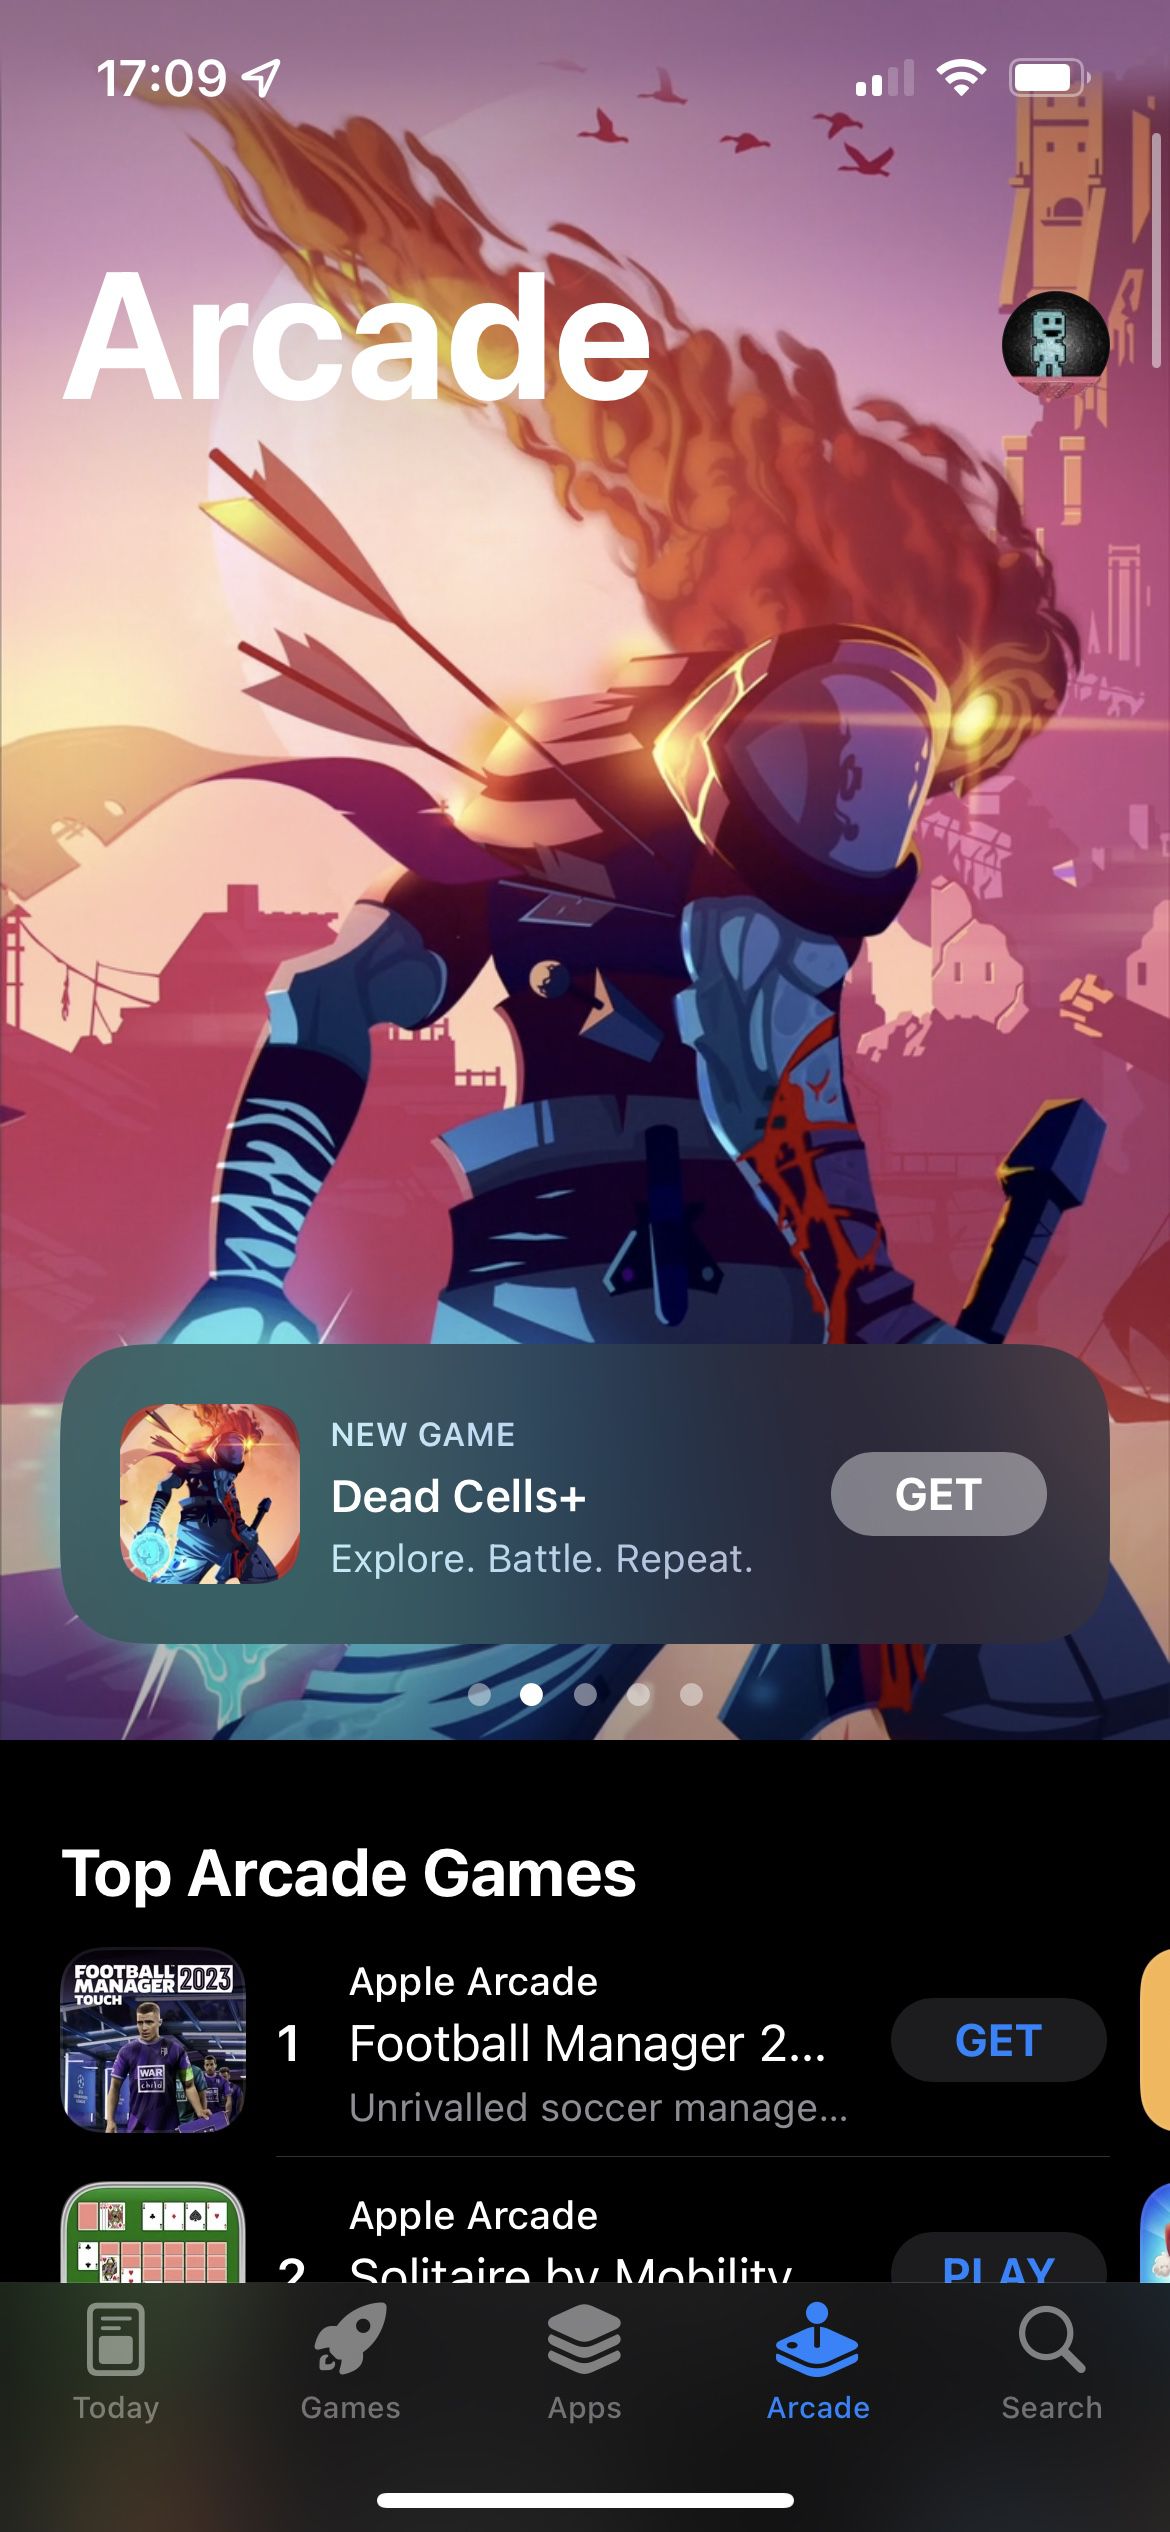 An Apple Arcade home screen, showing Dead Cells in the promo spot and Football Manager as the top game